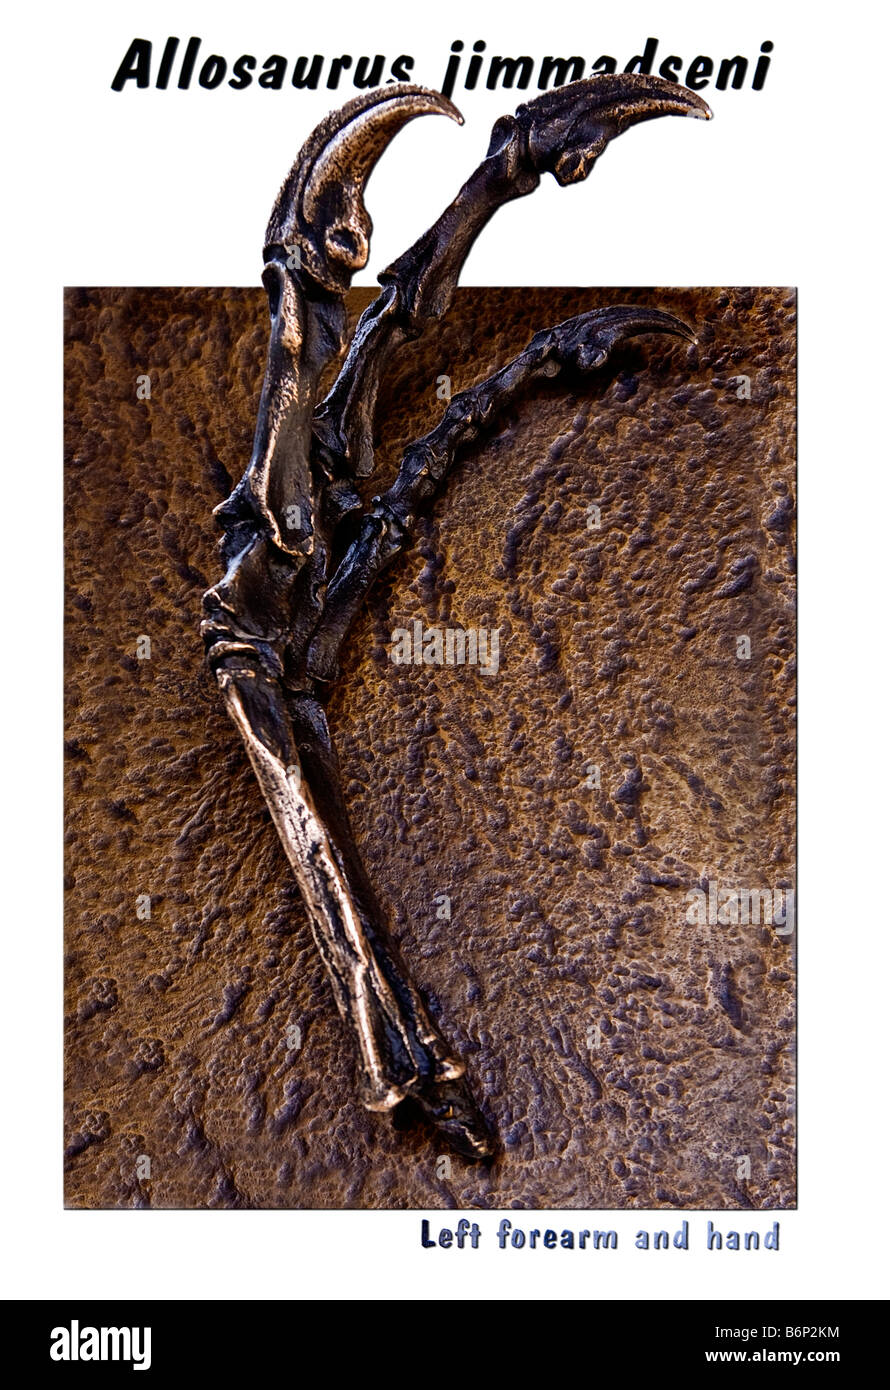 Image of a dinosaur left forearm and hand bones on display at the Dinosaur National Park in Colorado Stock Photo